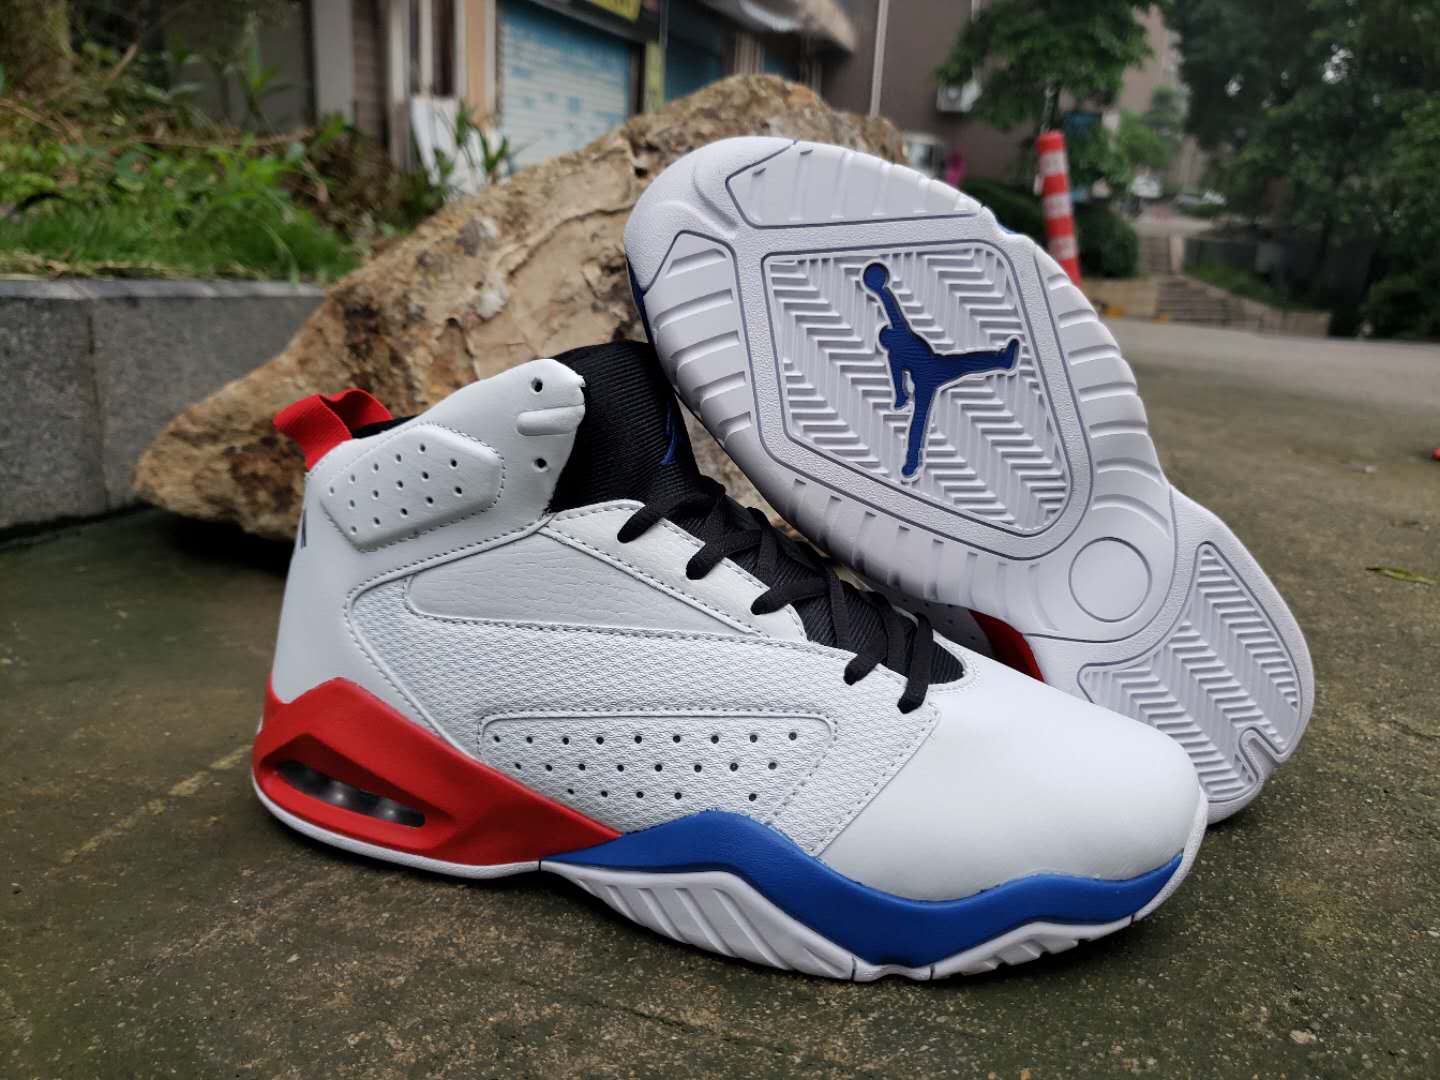 the red and blue jordans